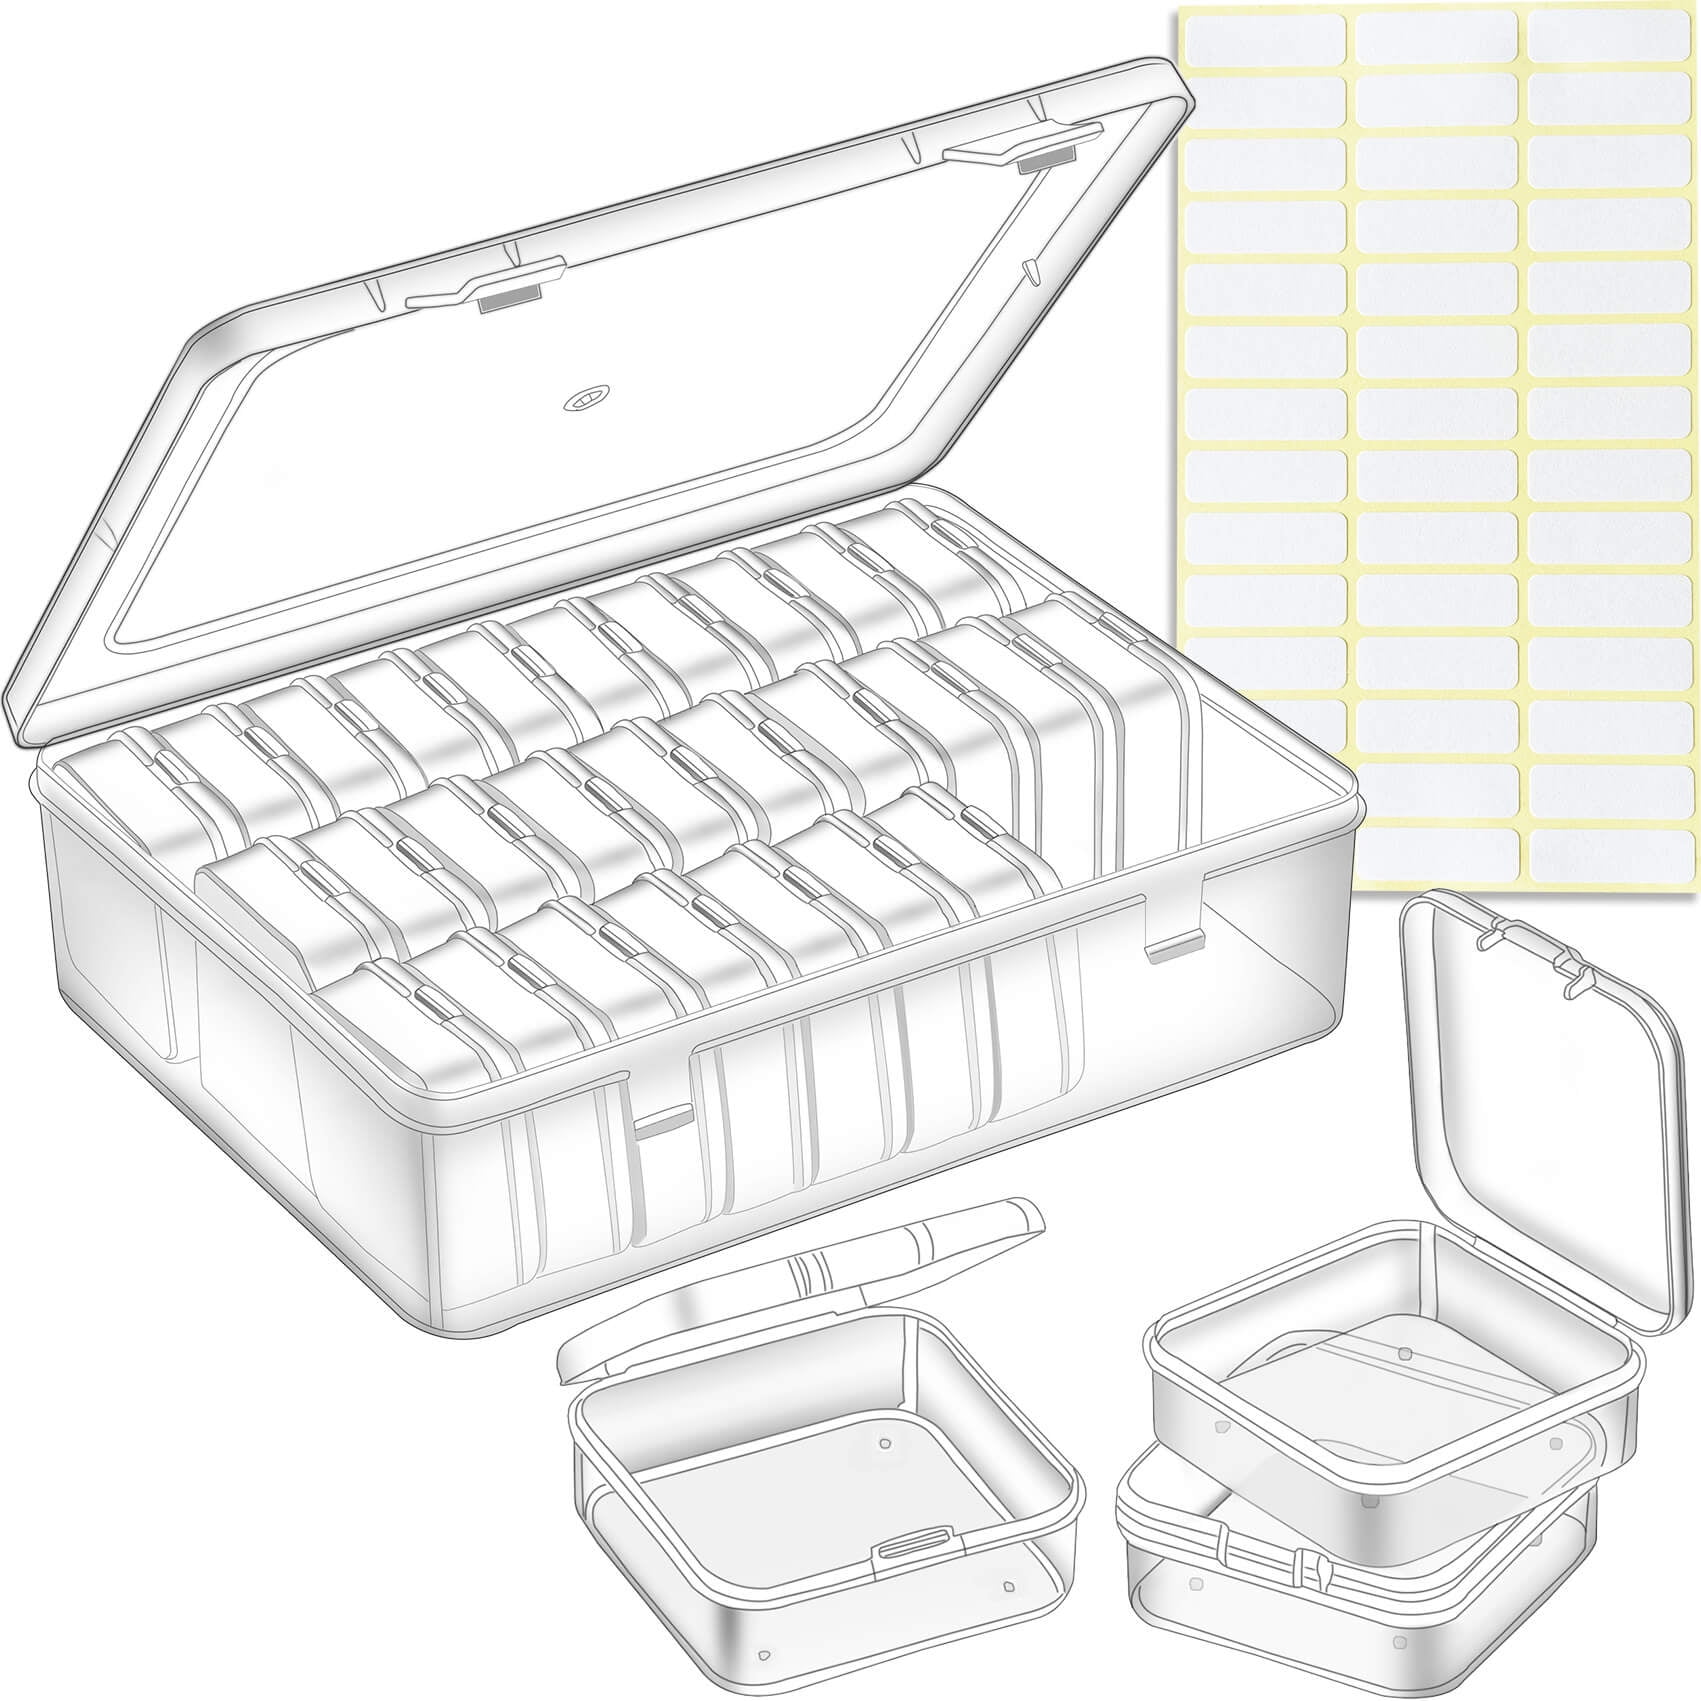 Check out the latest ArtBin 080216 Quick View Deep Base Carrying  Case-15X3.25X14.375 Translucent 956 collections today